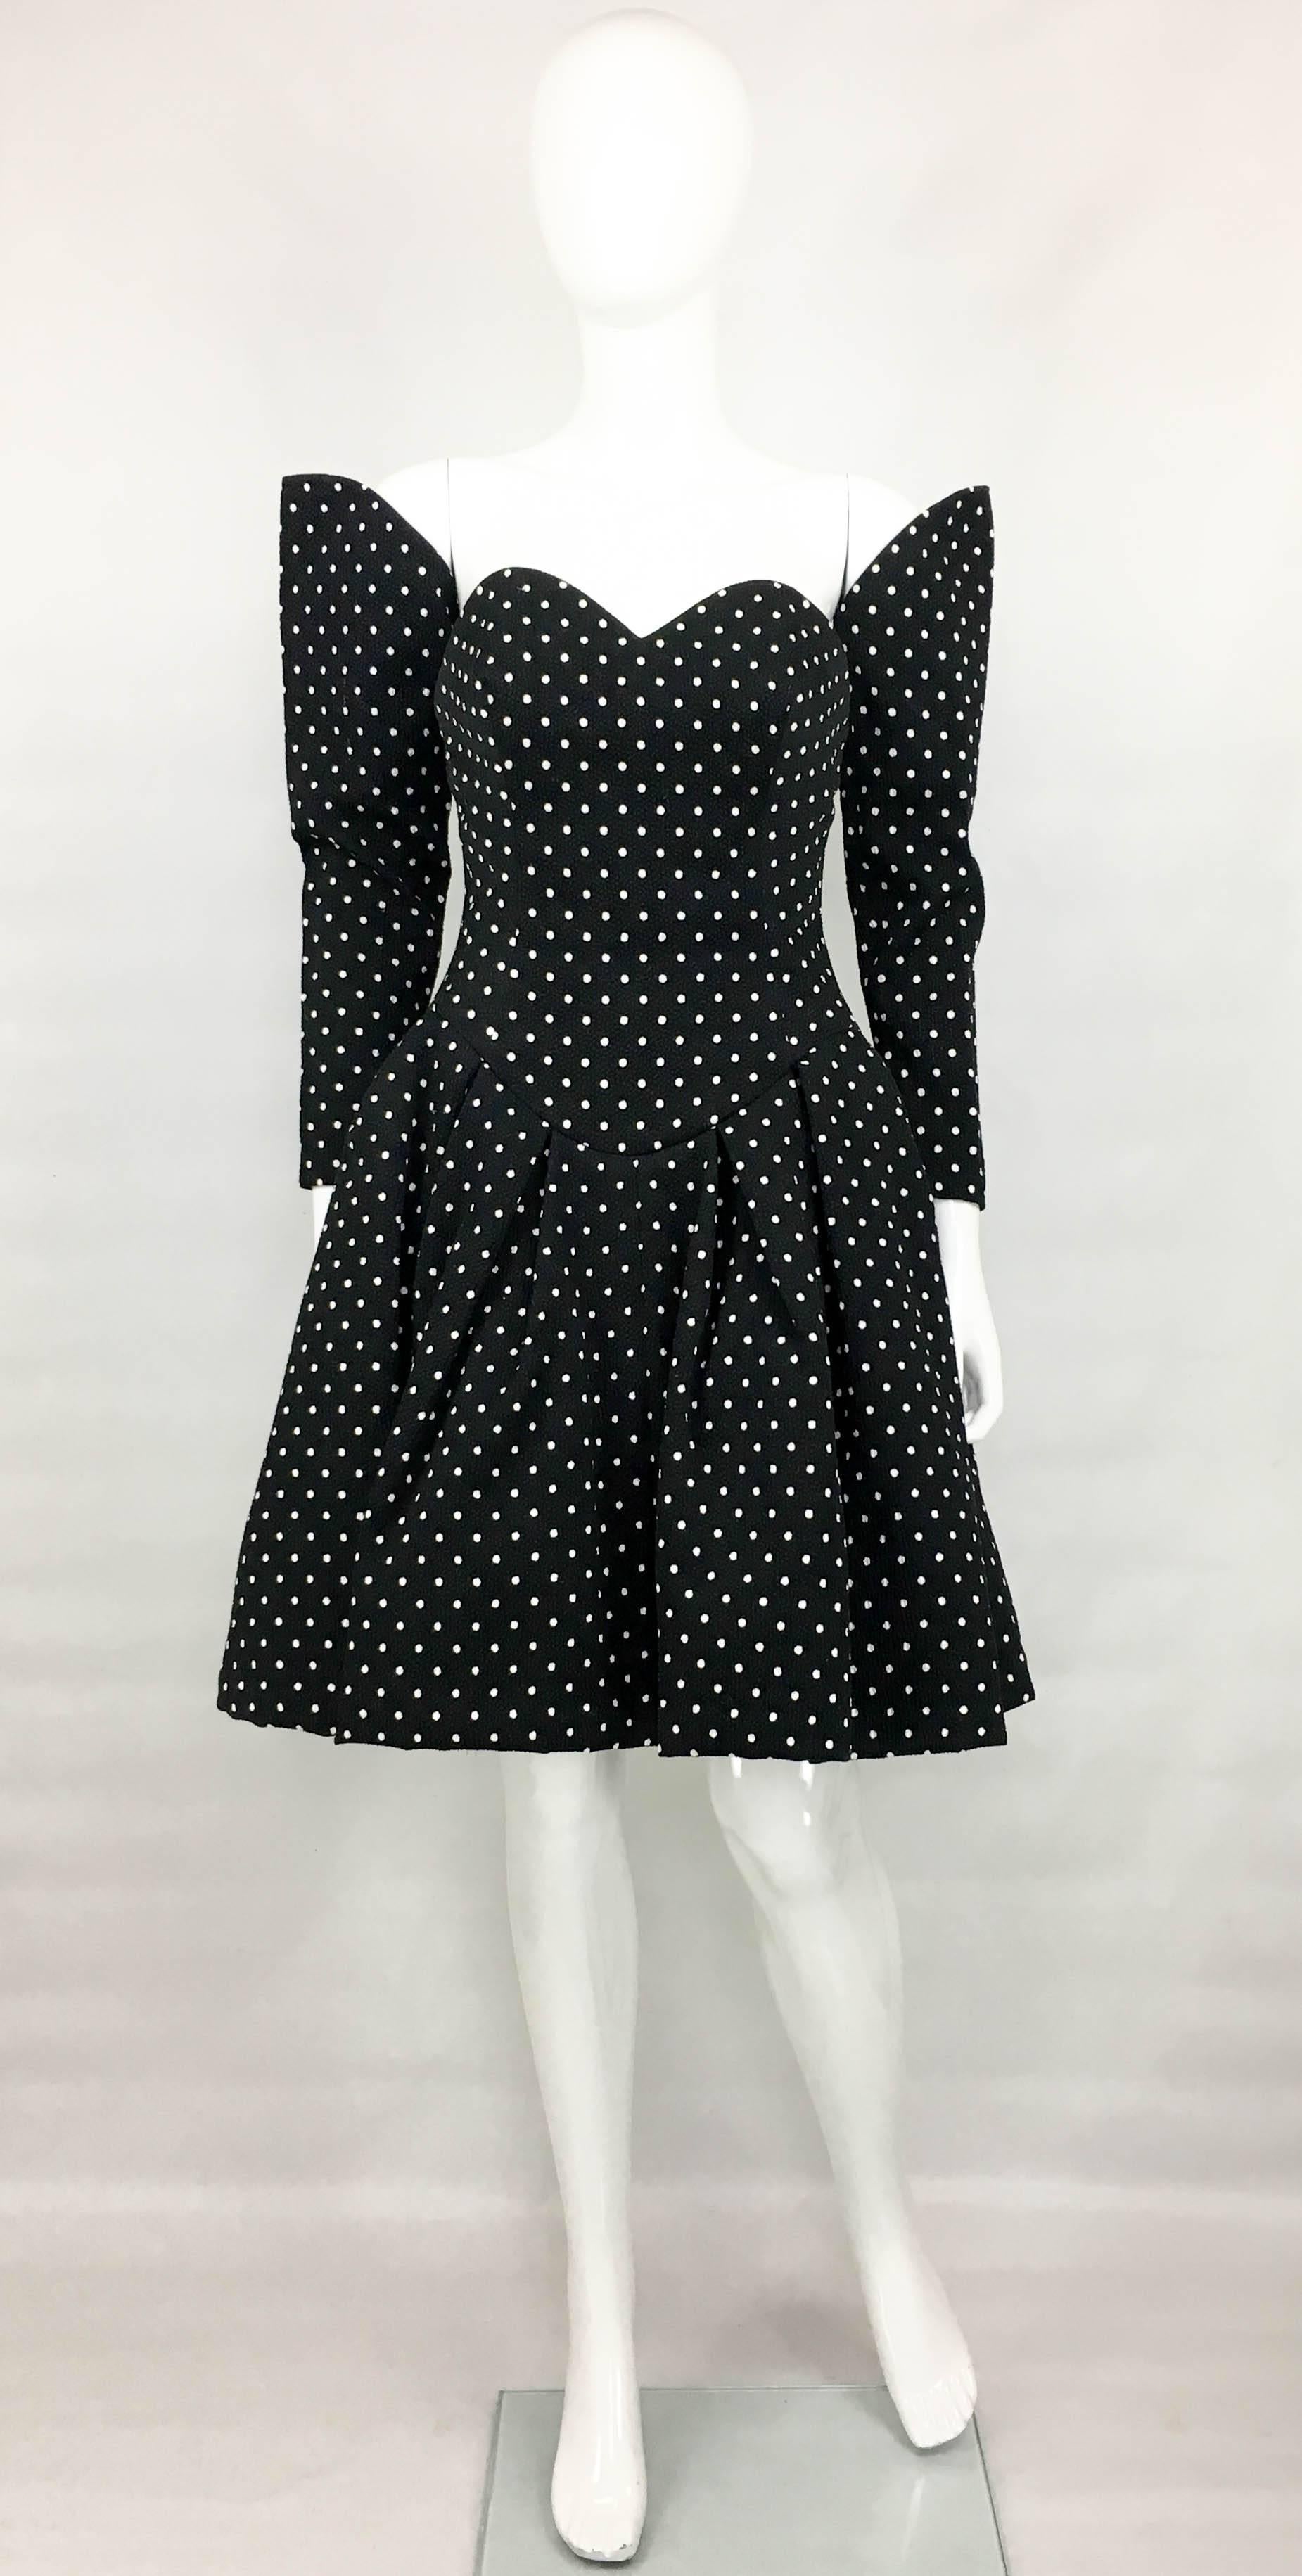 Vintage Lacroix Haute Couture Puffball Polka Dot Dress. This phenomenal strapless dress by Christian Lacroix dates back from the late 1980’s. Lacroix opened his Couture House in 1987 and shook the fashion world with his flamboyant and avantgarde